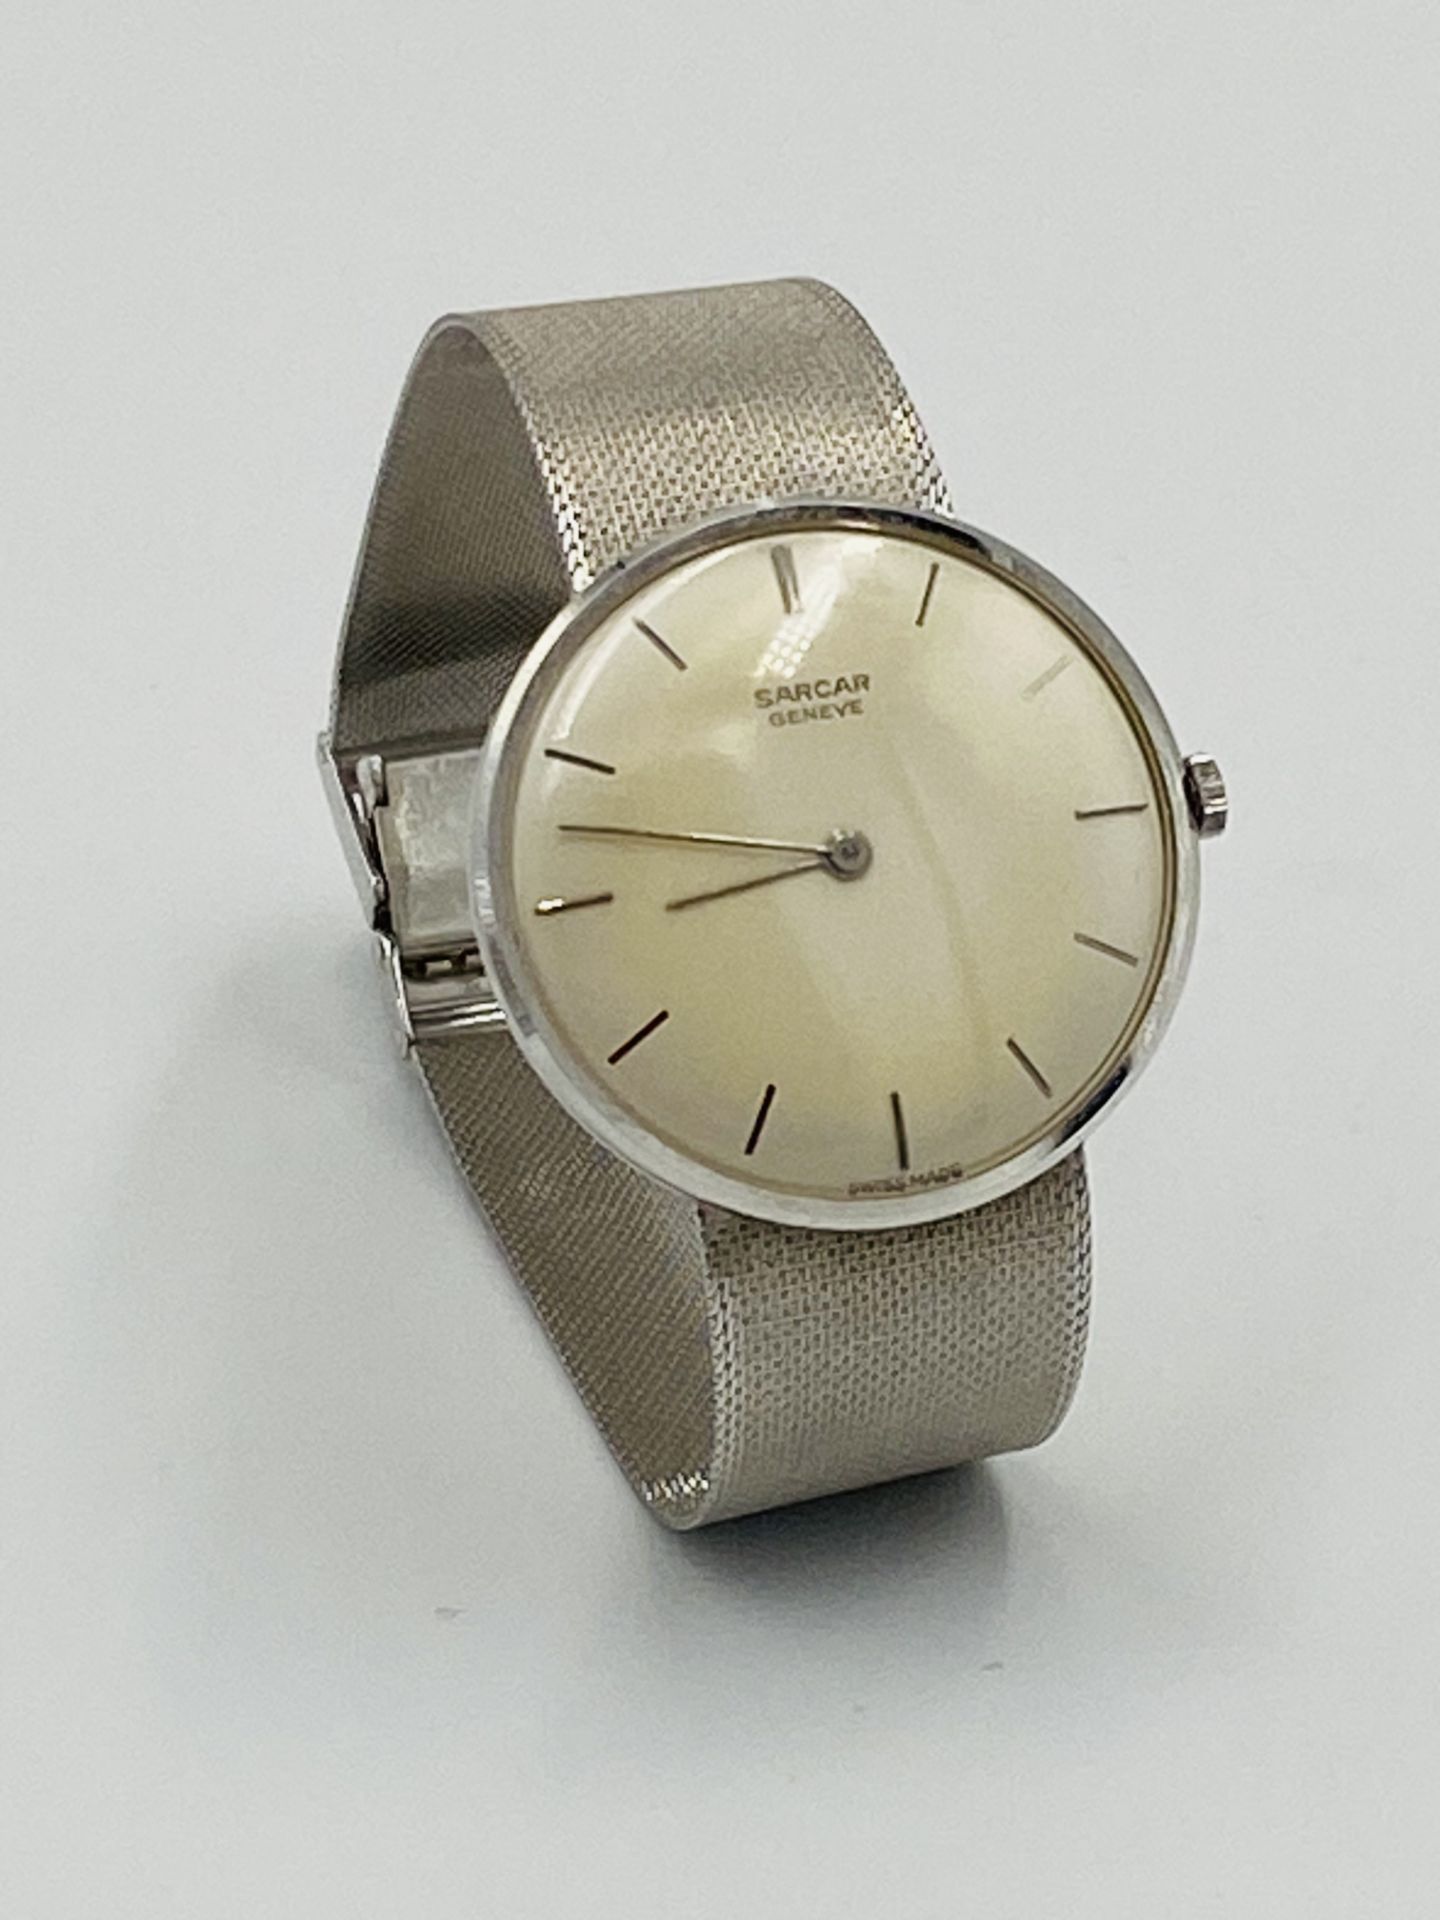 Sarcar Geneve wristwatch with 18ct gold strap - Image 2 of 7